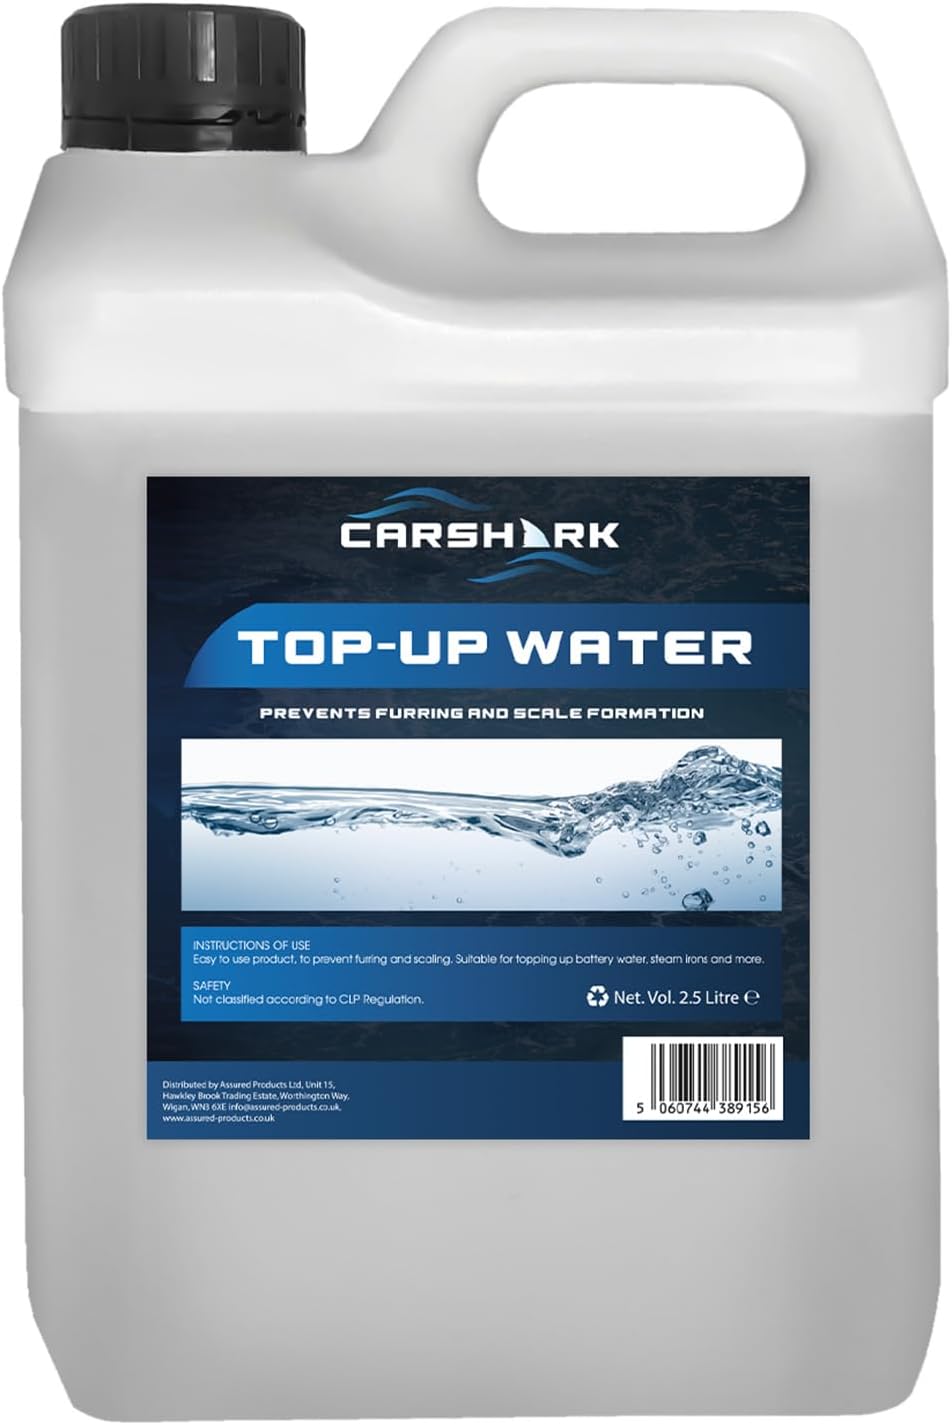 CARSHARK Top-Up Water 2.5L, Deionised Water